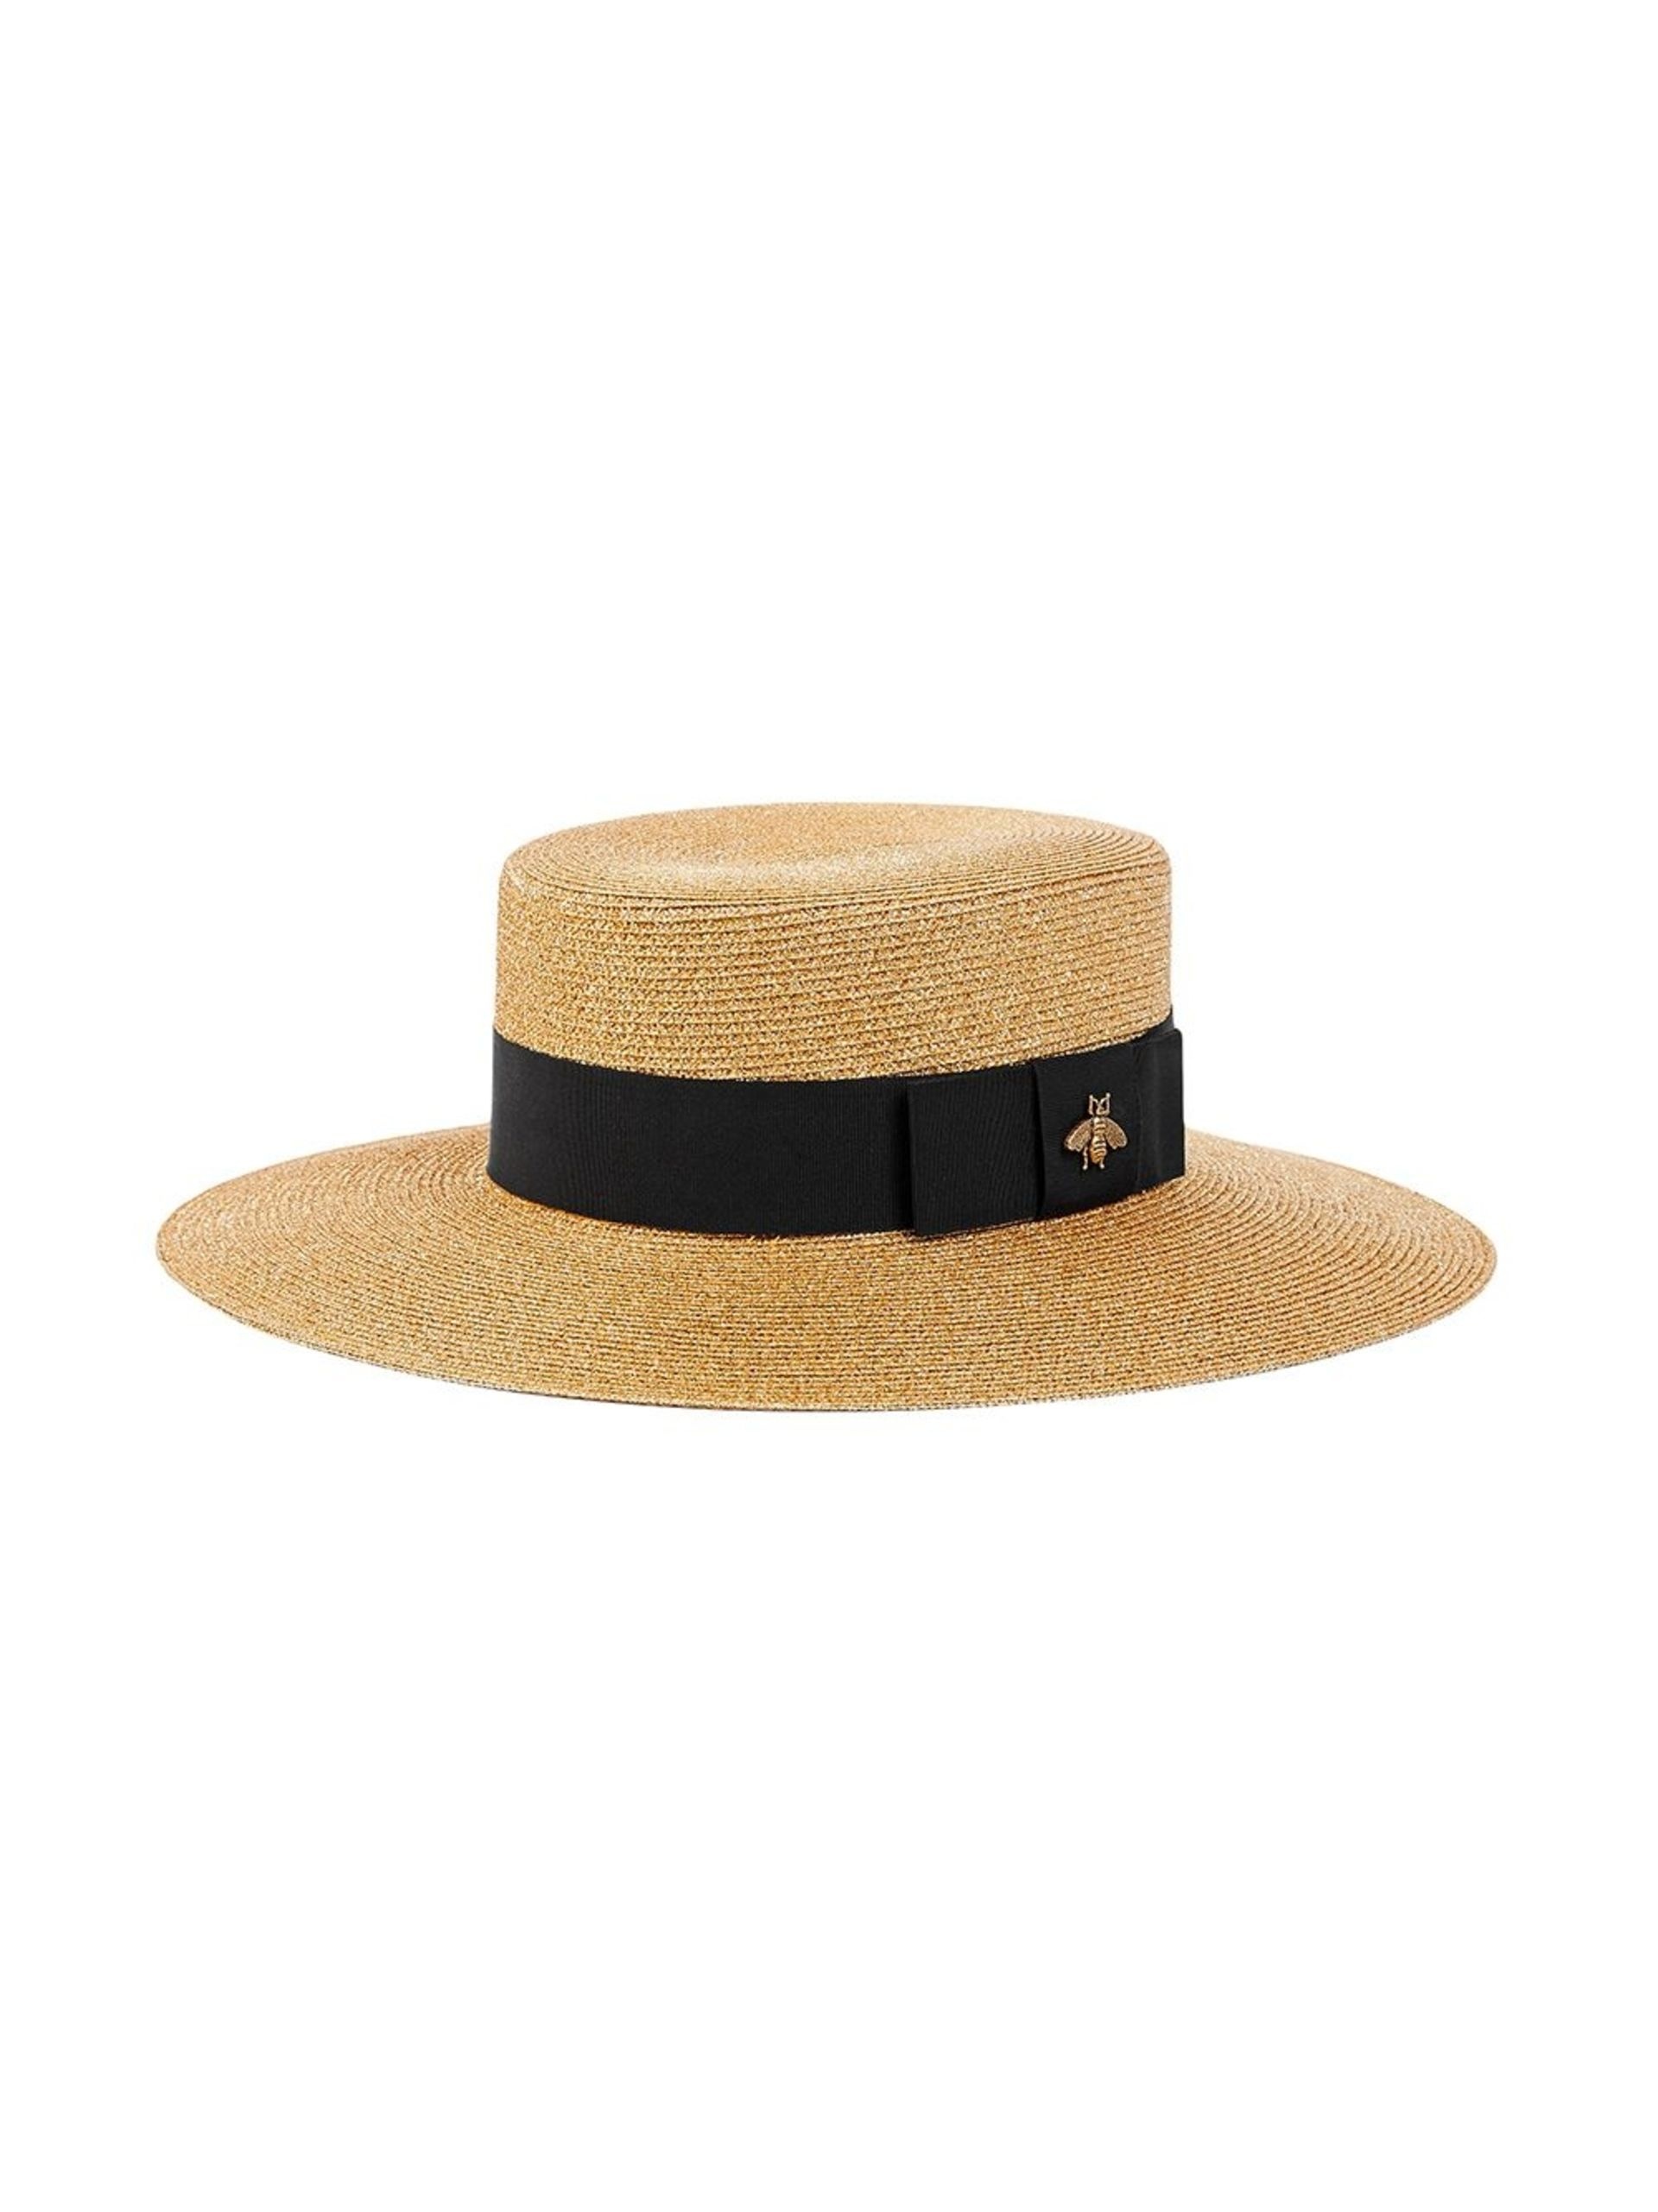 neutral straw boater hat - 2